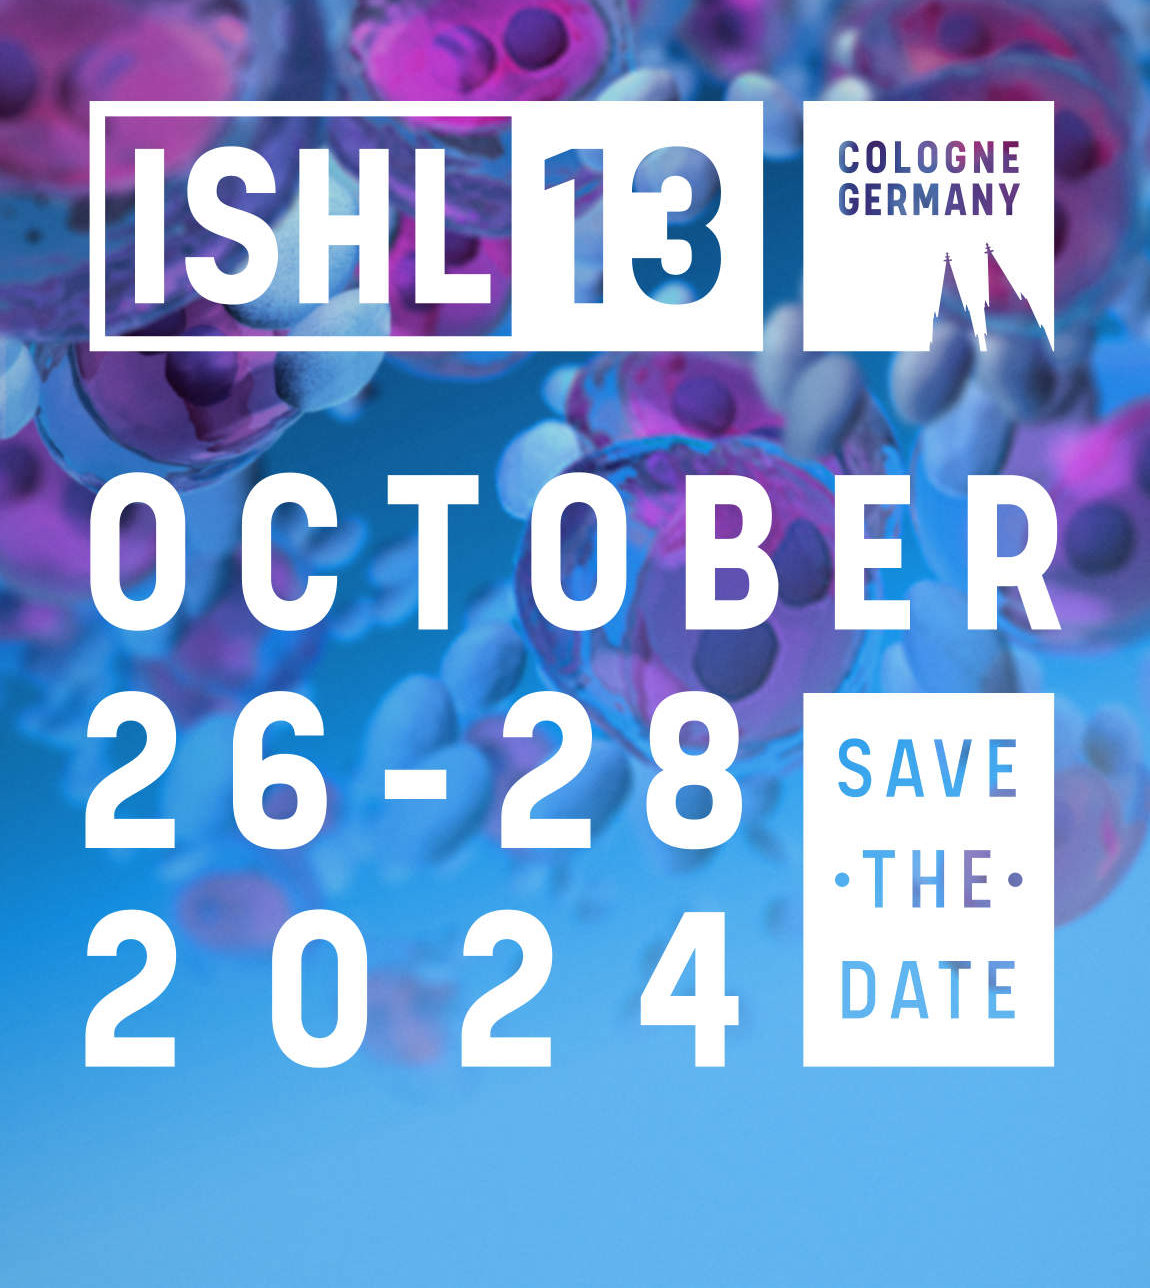 ISHL13 - Save the Date